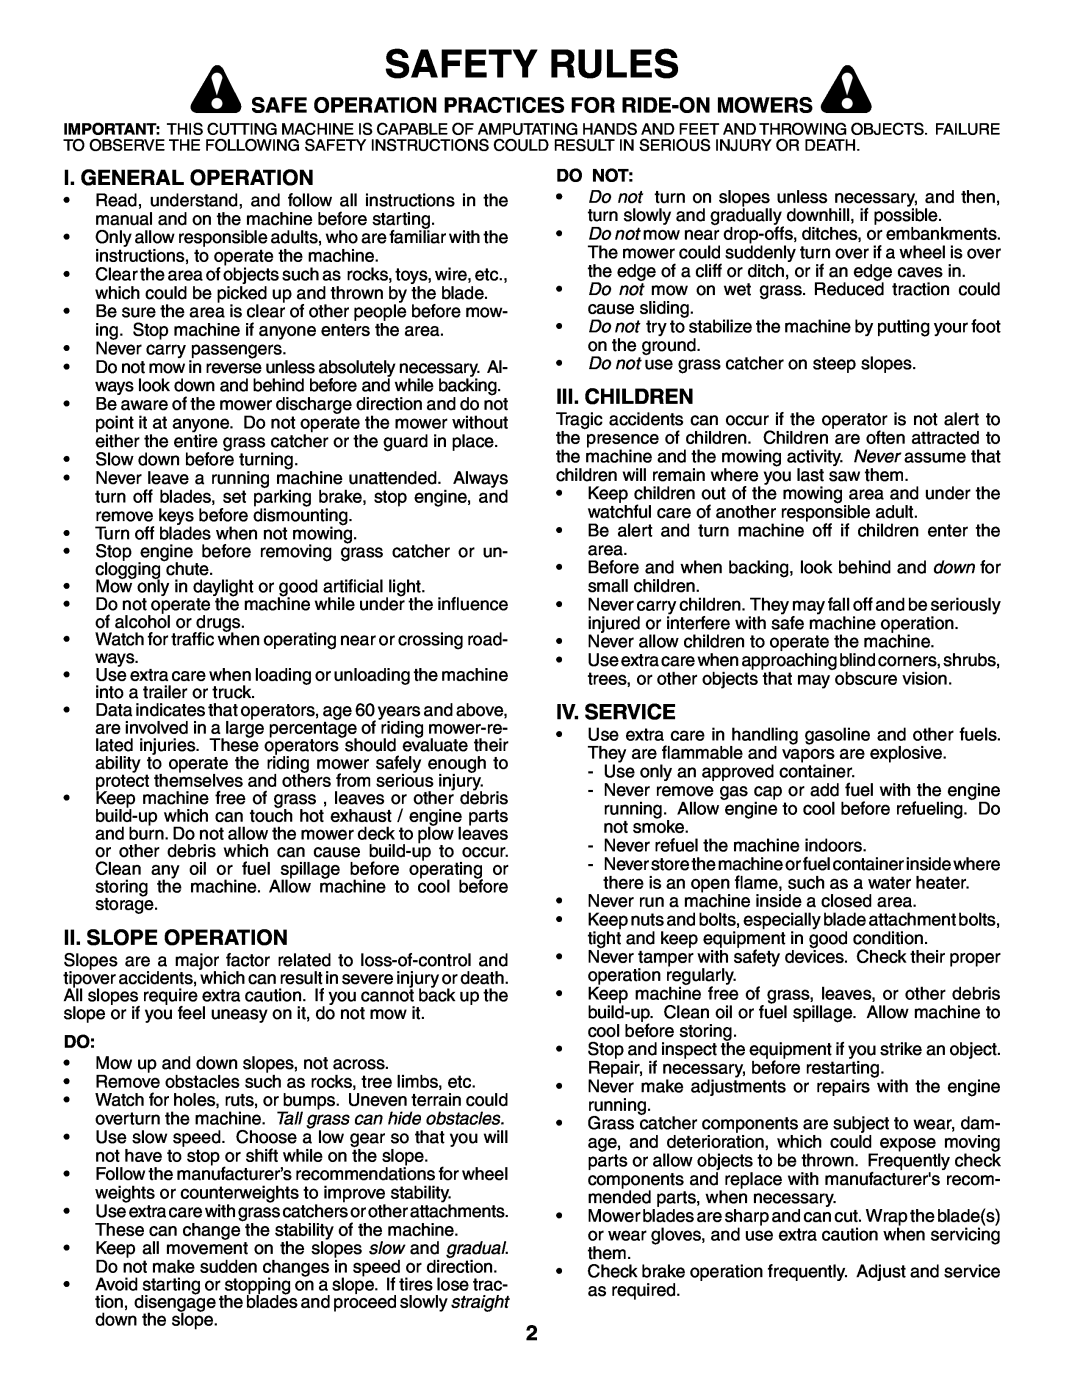 Husqvarna LTH18542 Safety Rules, Safe Operation Practices For Ride-On Mowers, I. General Operation, Ii. Slope Operation 